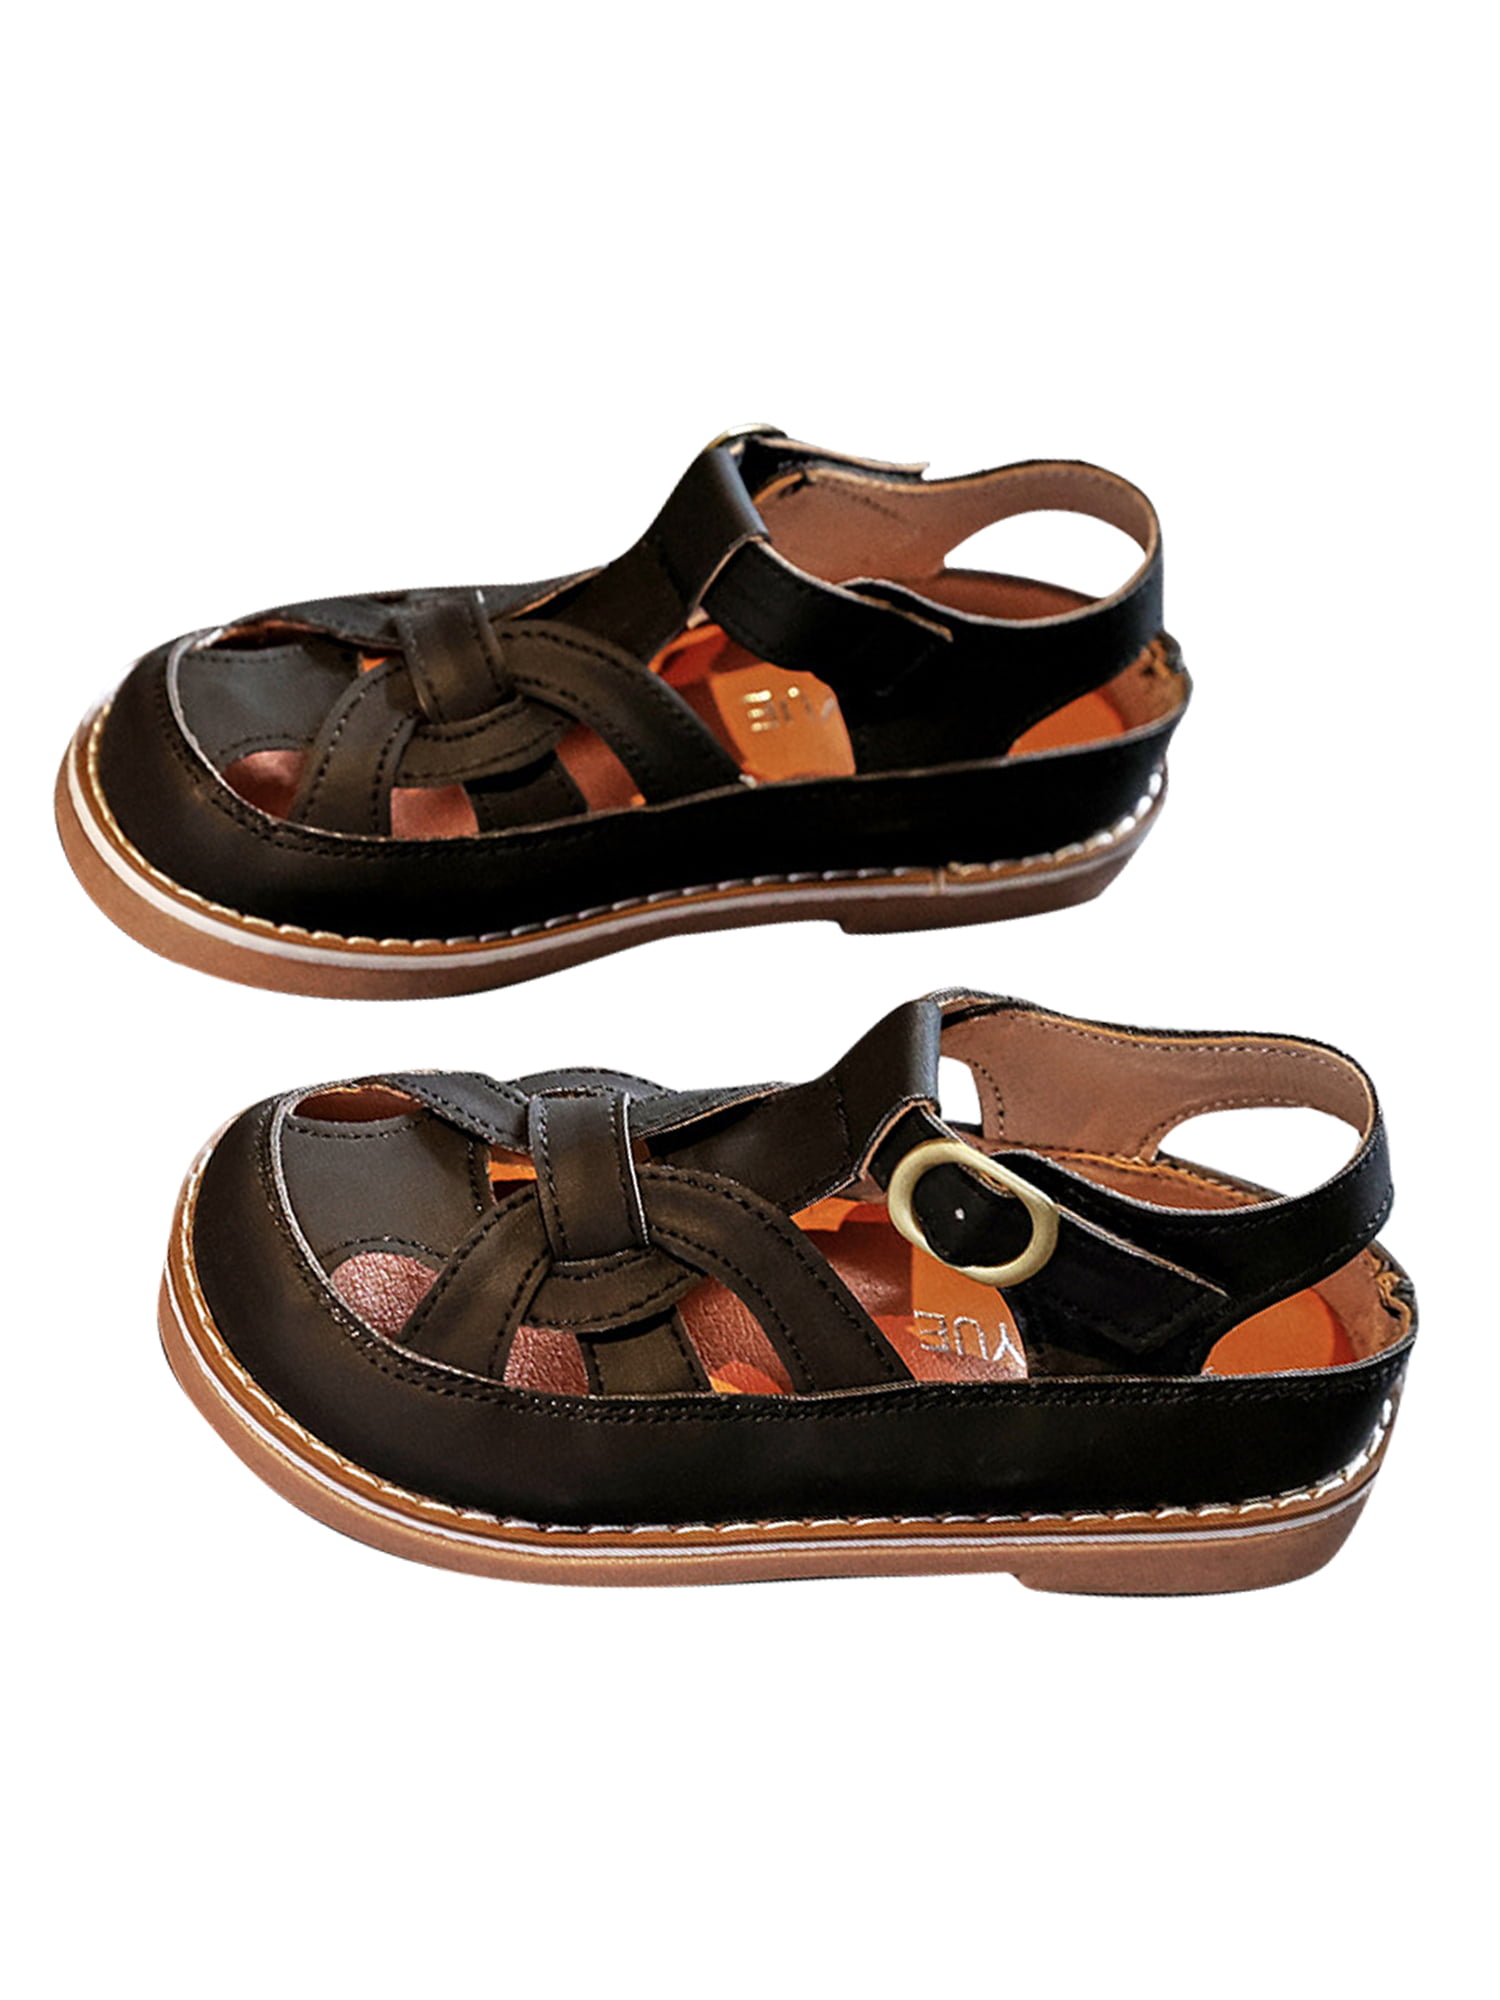 New Men Beach Buckle Strap Hollowed Out asual Breathable Fisherman Sandal Shoes 